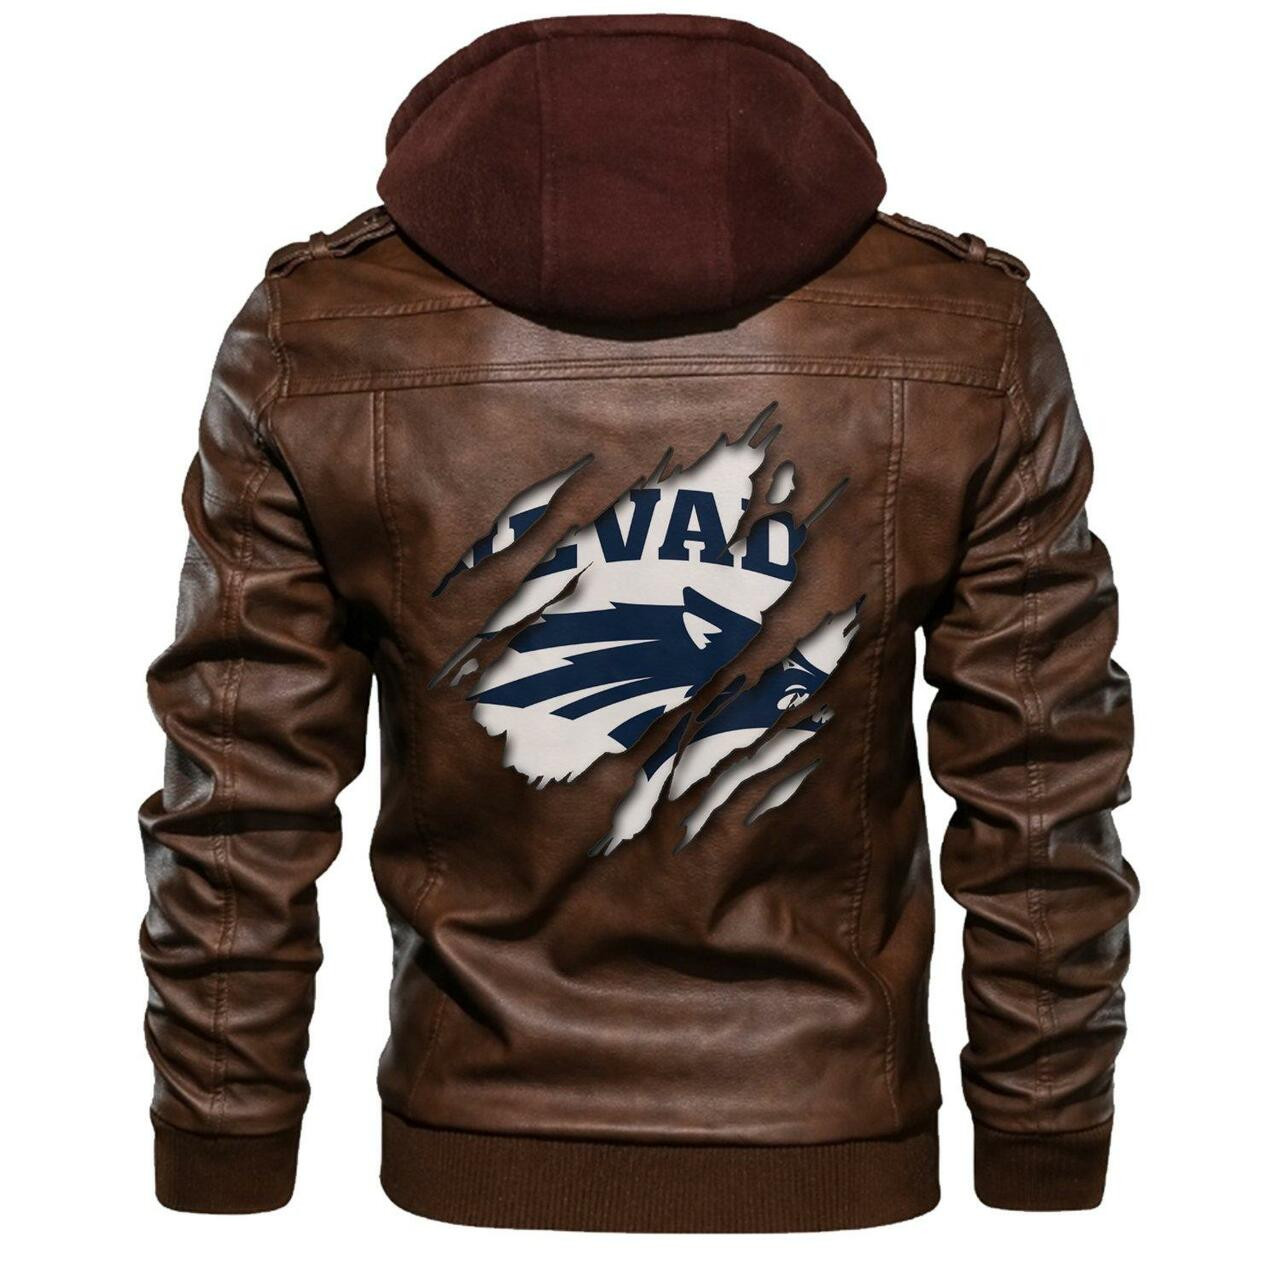 Nice leather jacket For you 177